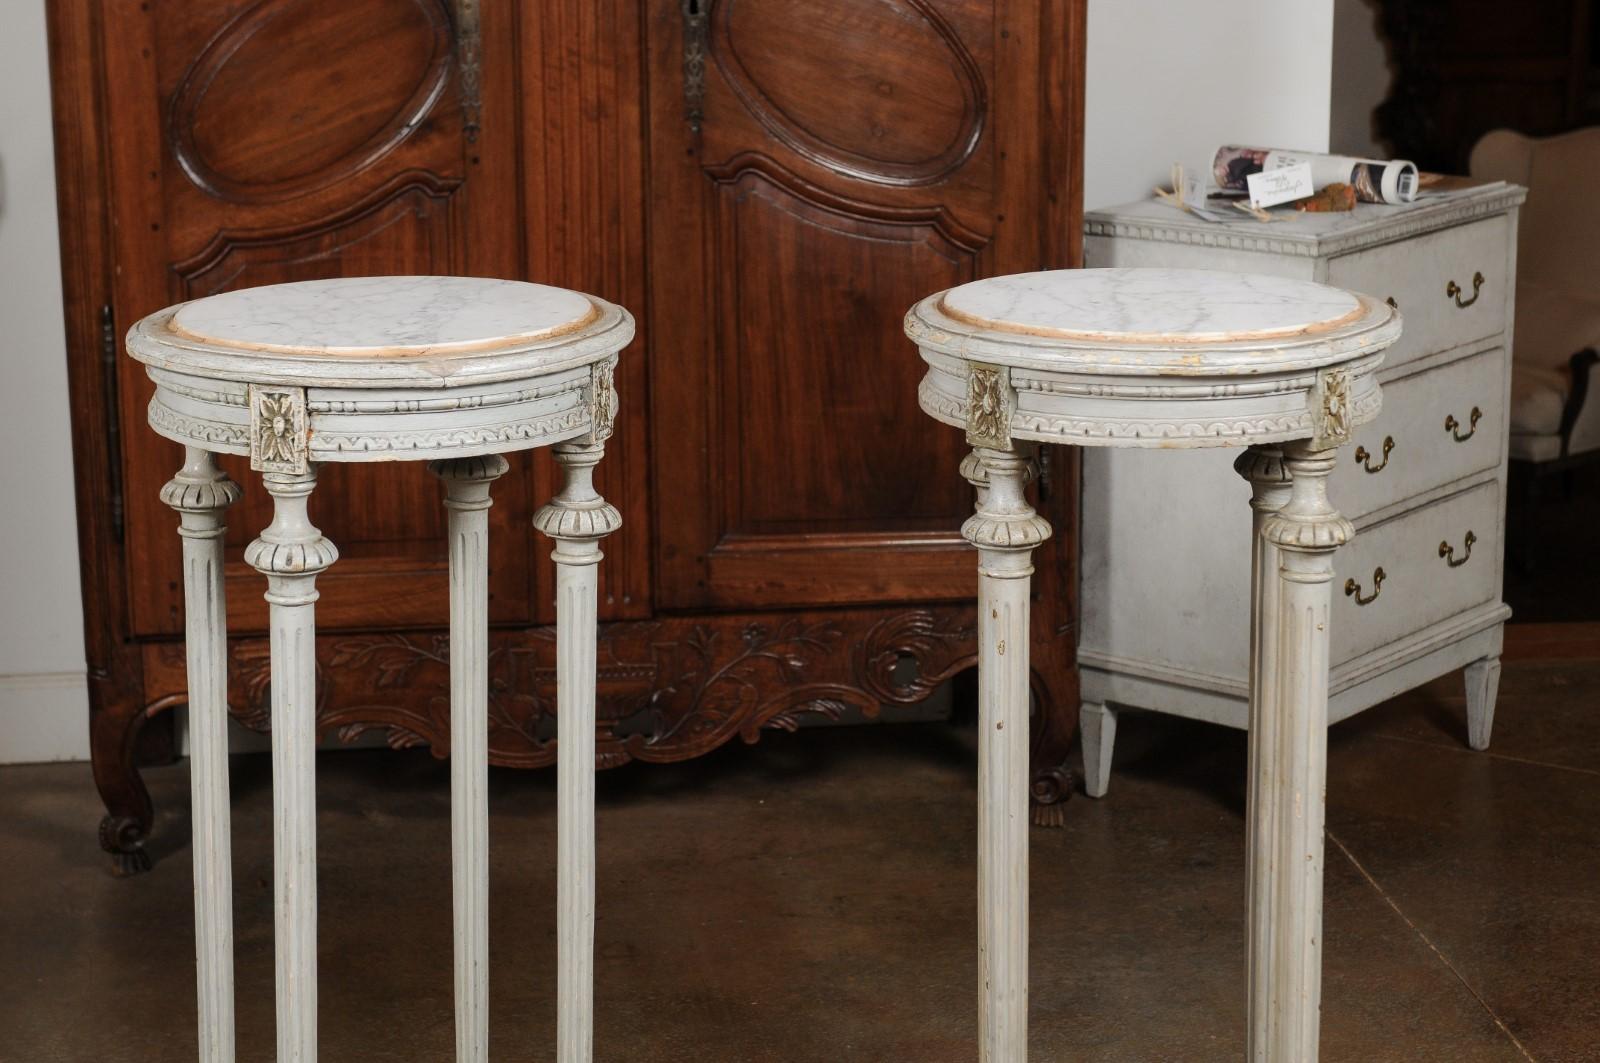 Pair of Swedish 1830s Neoclassical Painted Pedestal Stands with Carrara Marble In Good Condition For Sale In Atlanta, GA